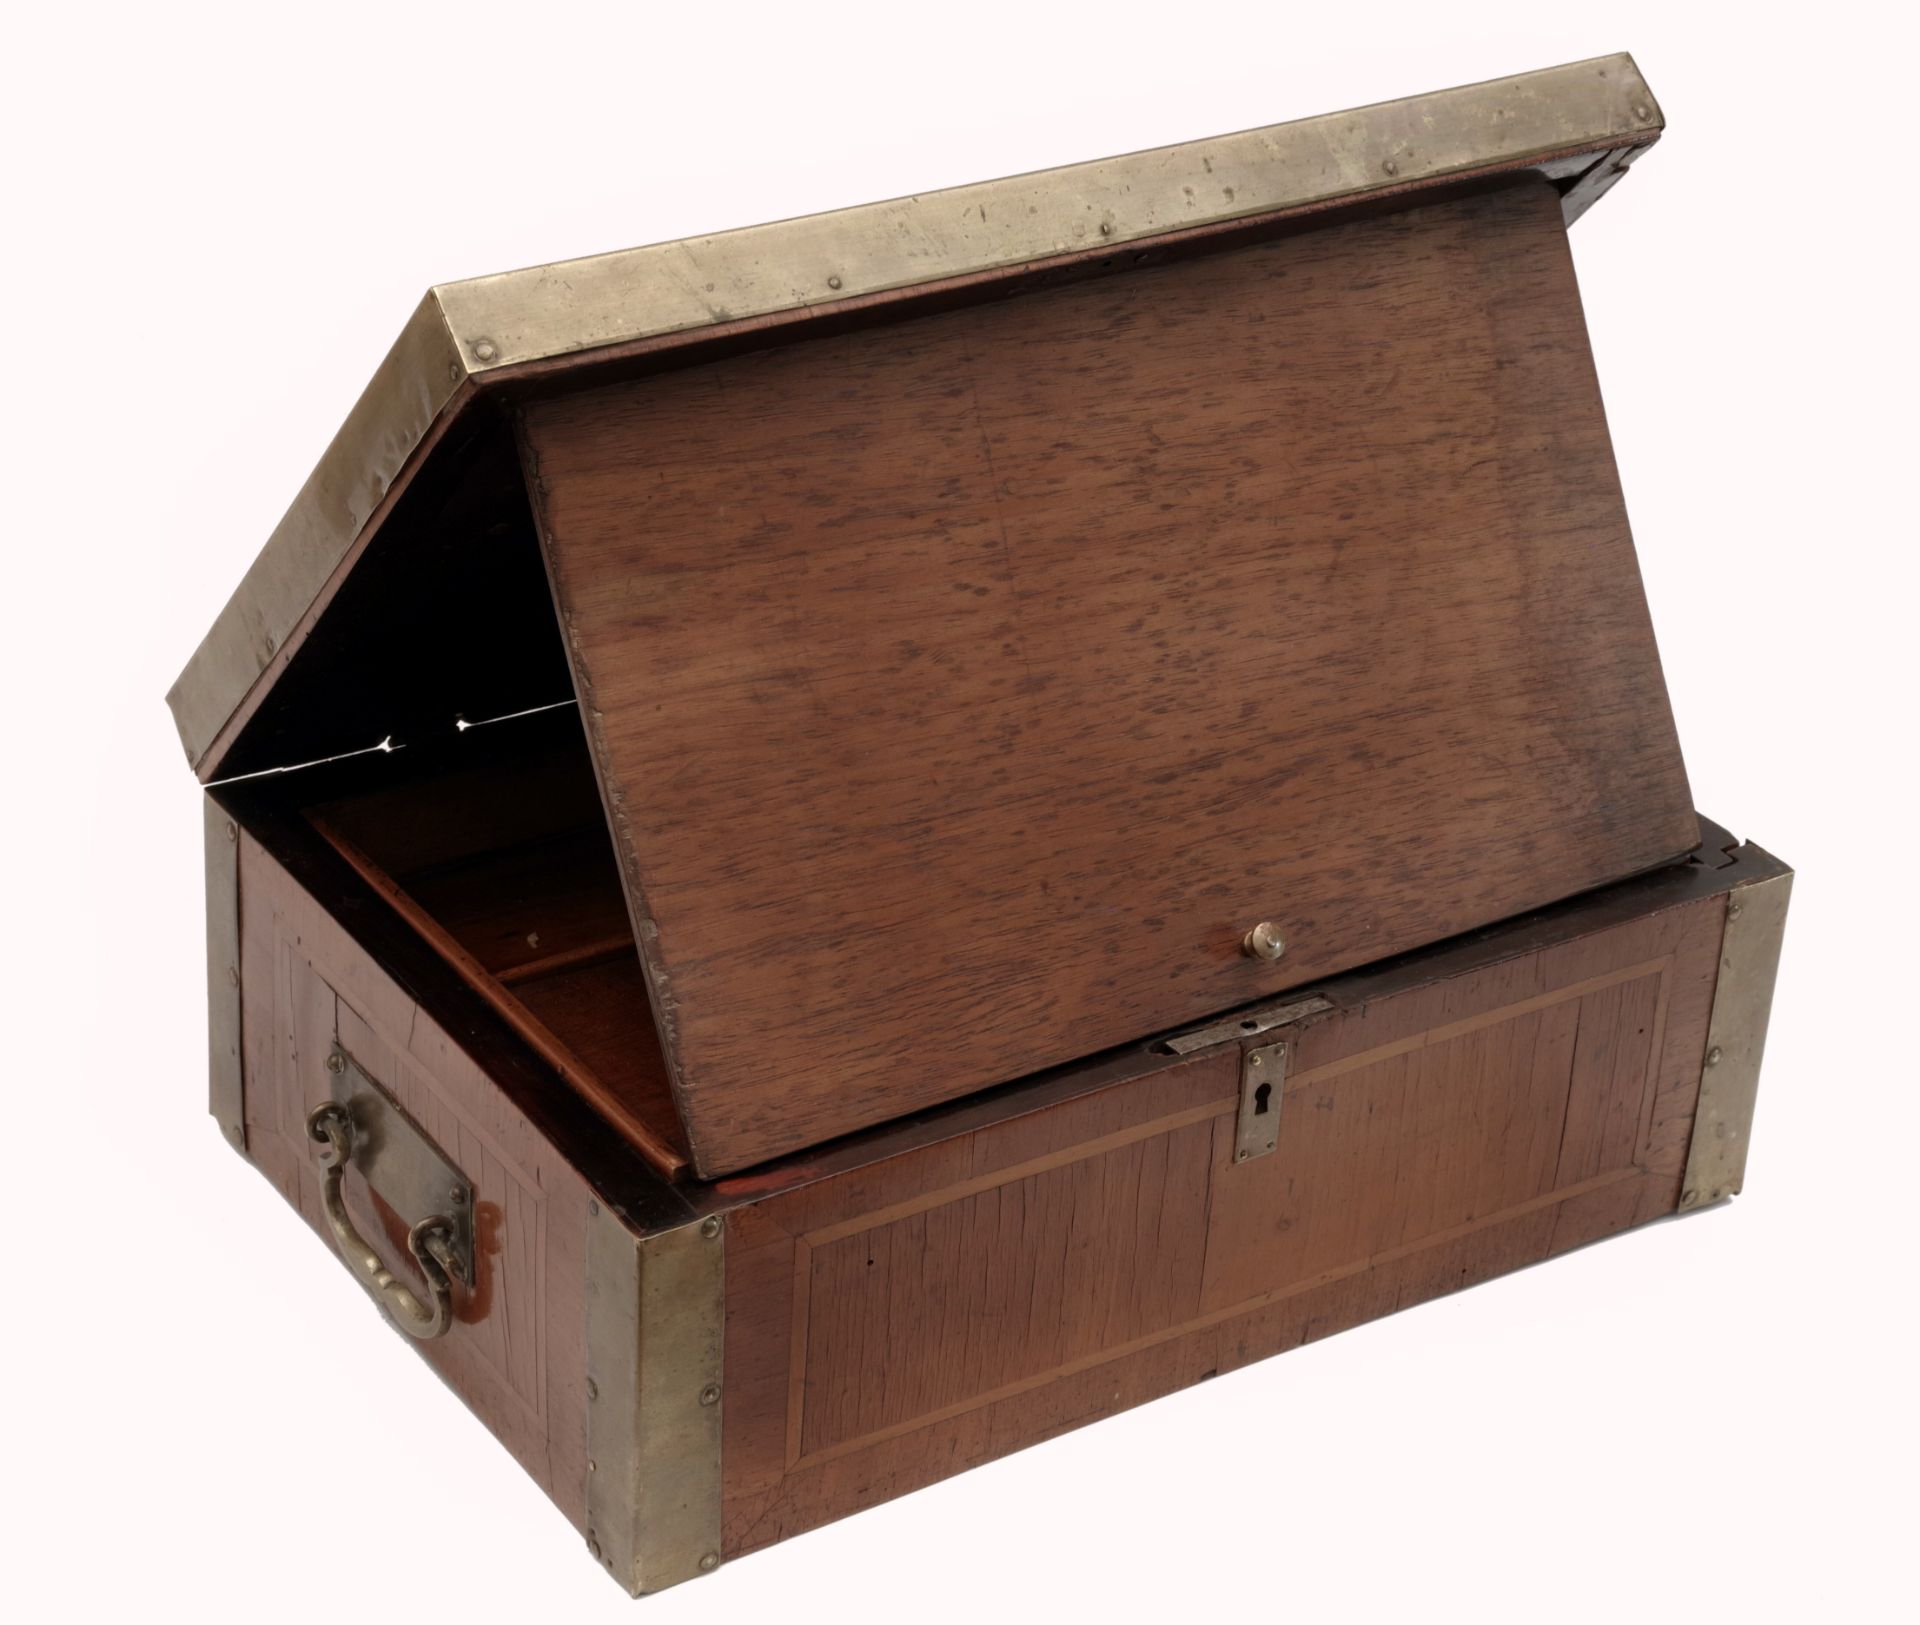 A Jewelry Box with Secret Spaces - Image 3 of 3